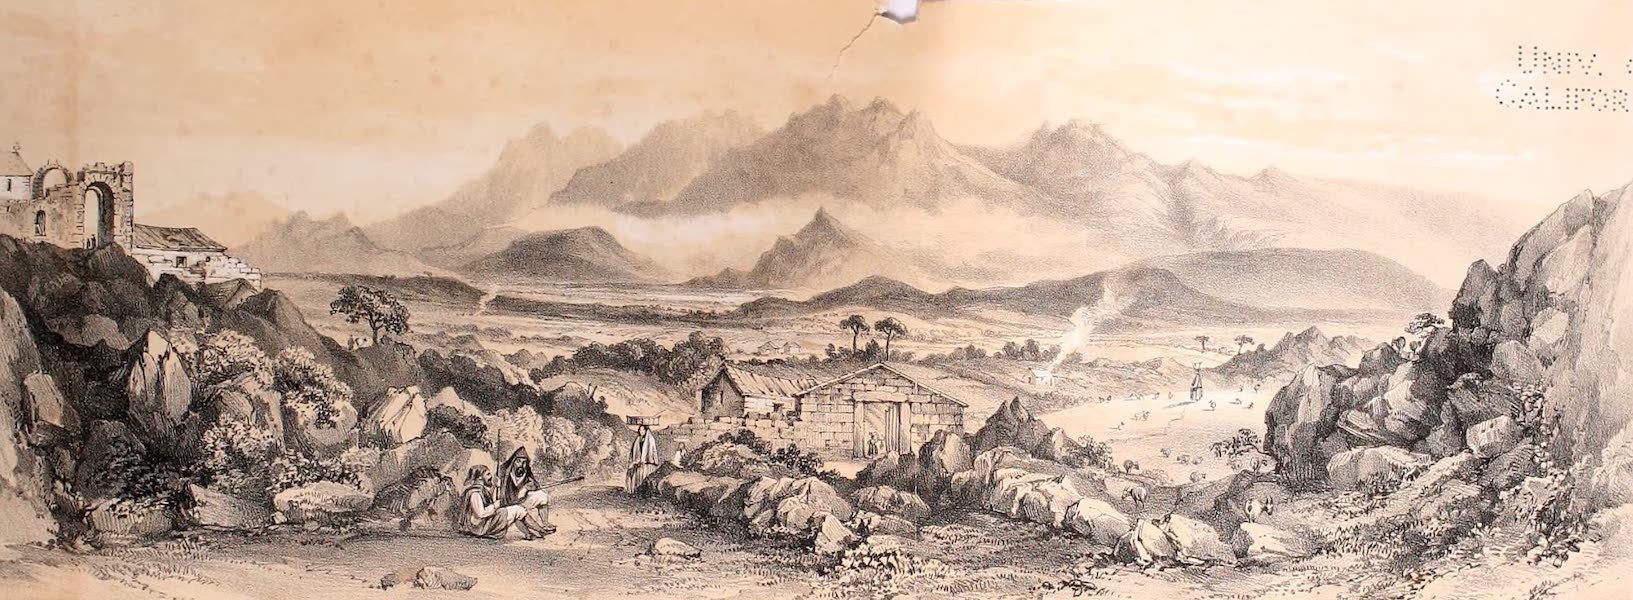 Rambles in the Islands of Corsica and Sardinia - The Limbara, from Tempio (1861)